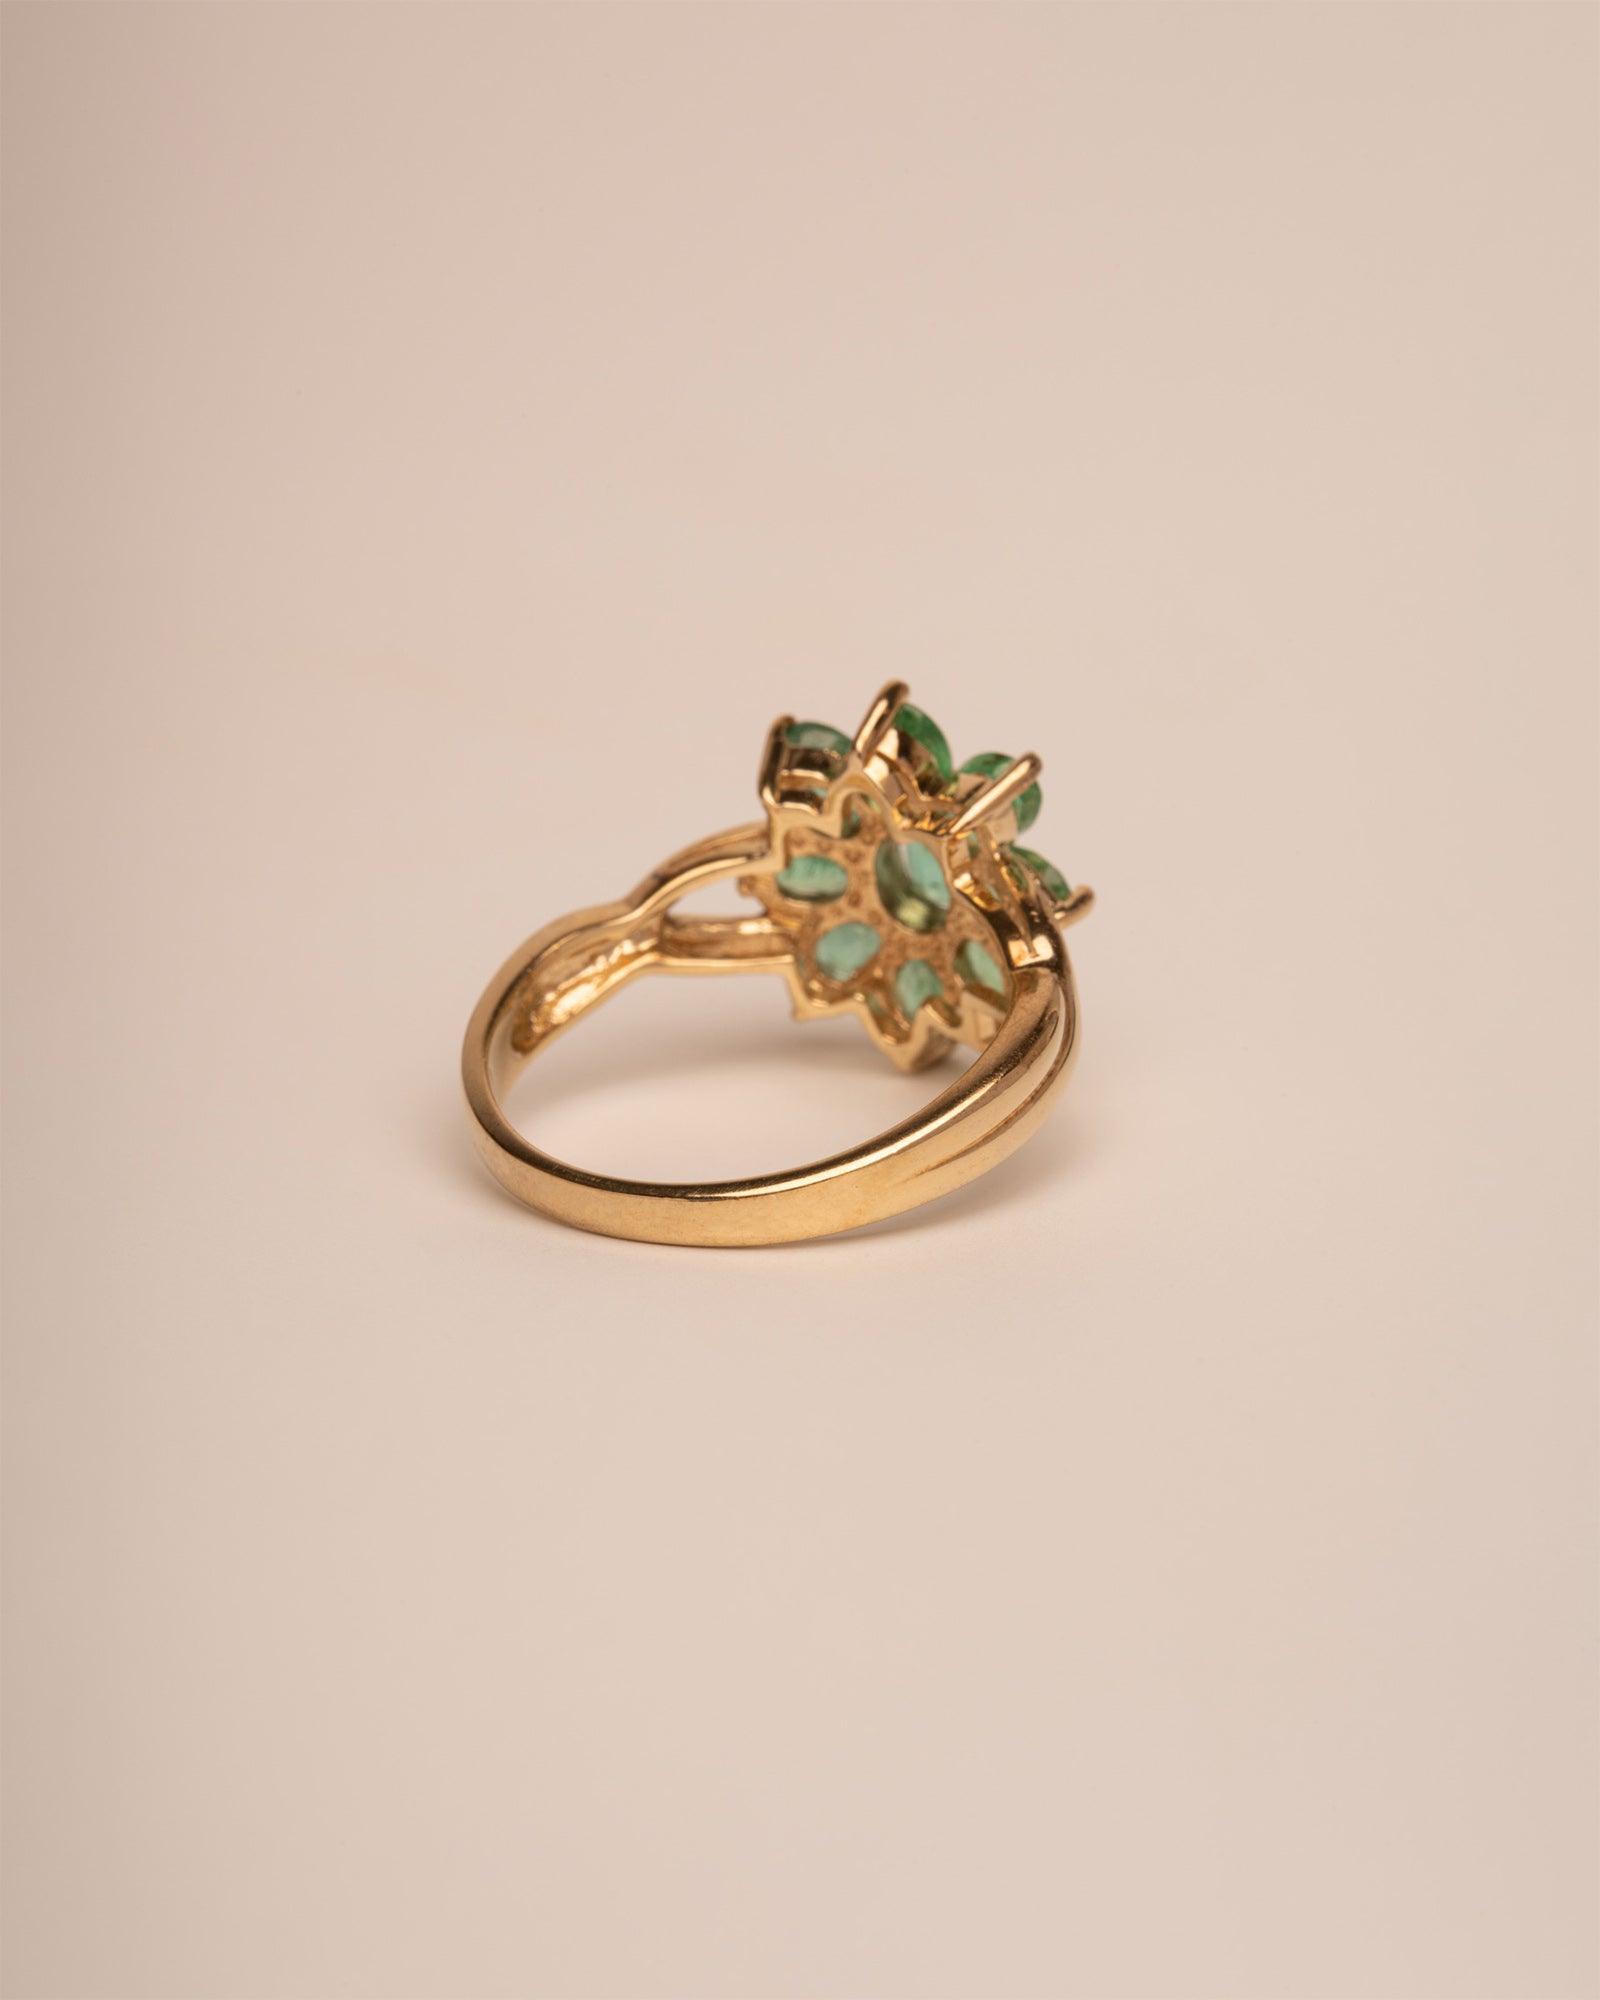 Muriel 9ct Gold Emerald Cluster Ring